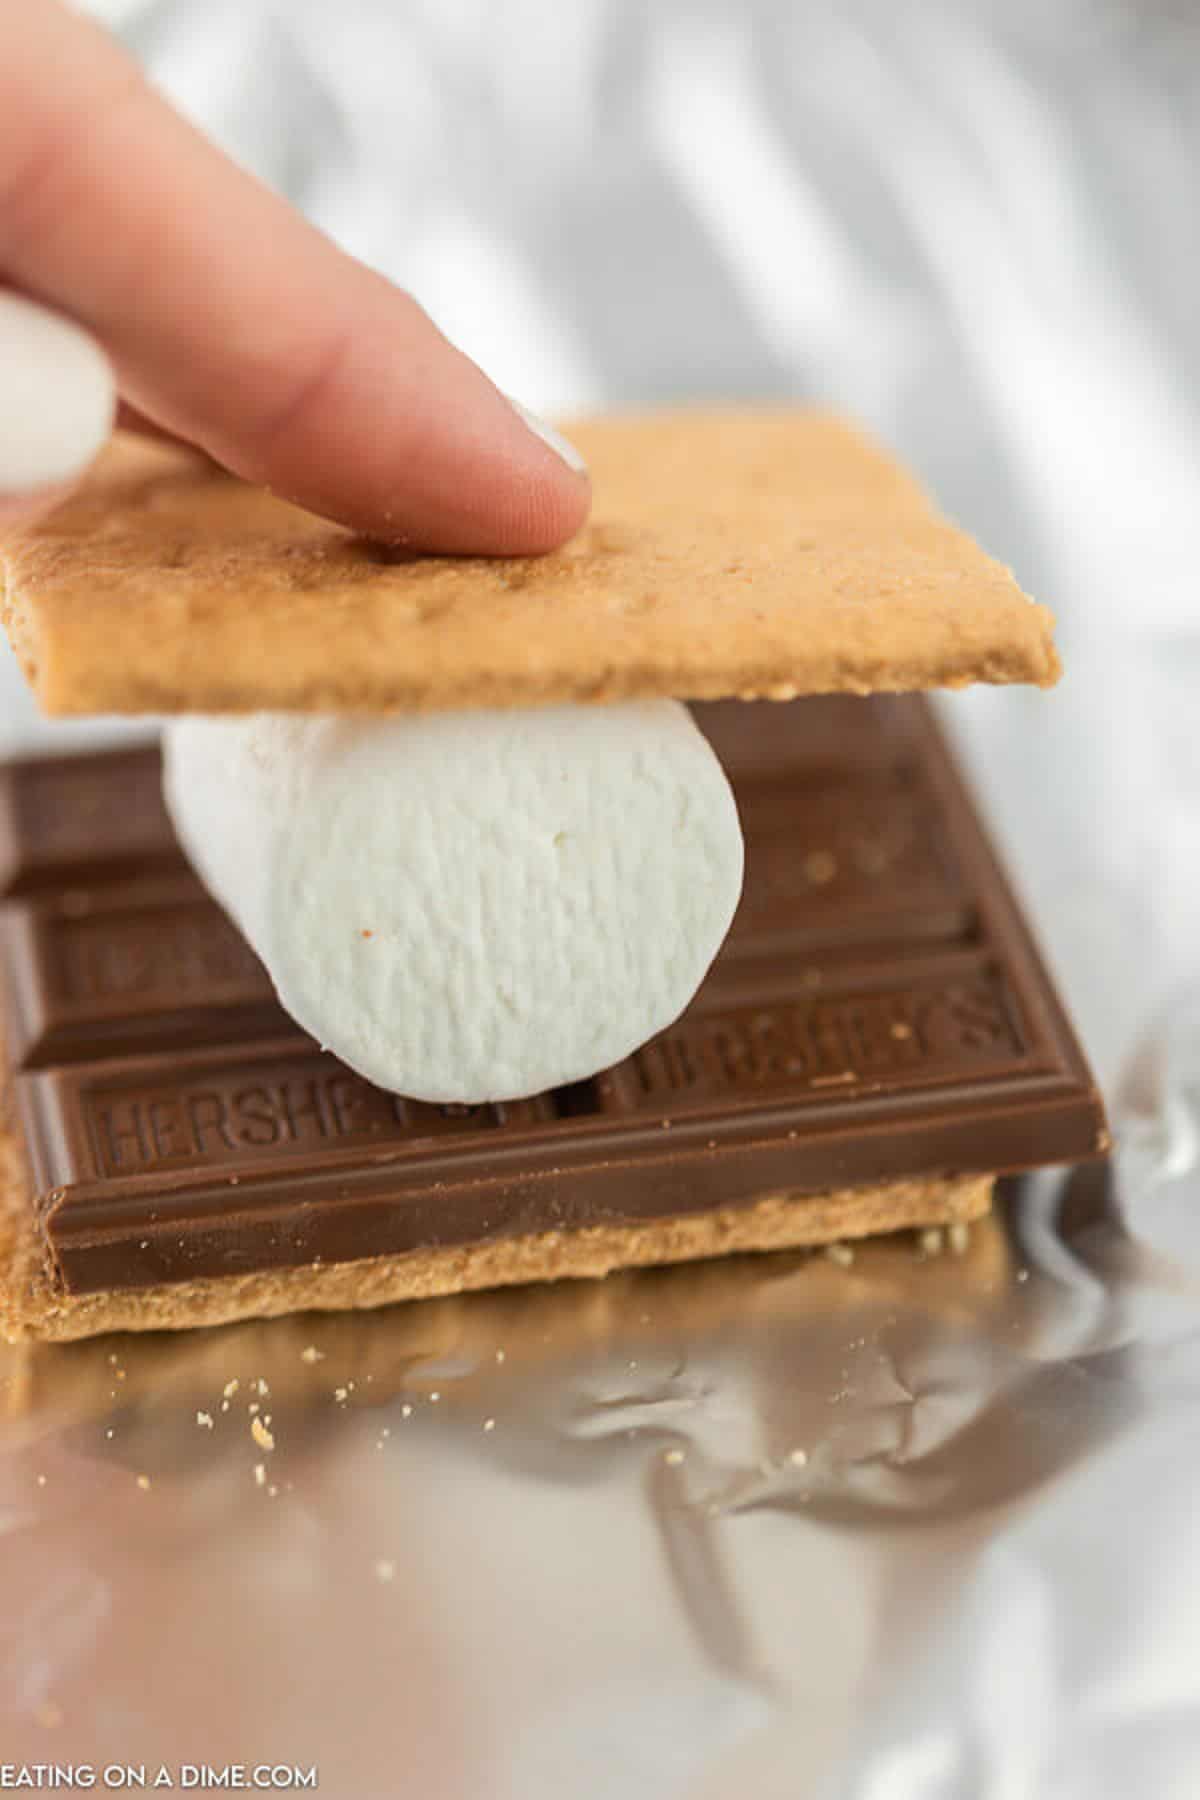 An unbaked assembled s'more on a piece of foil.  